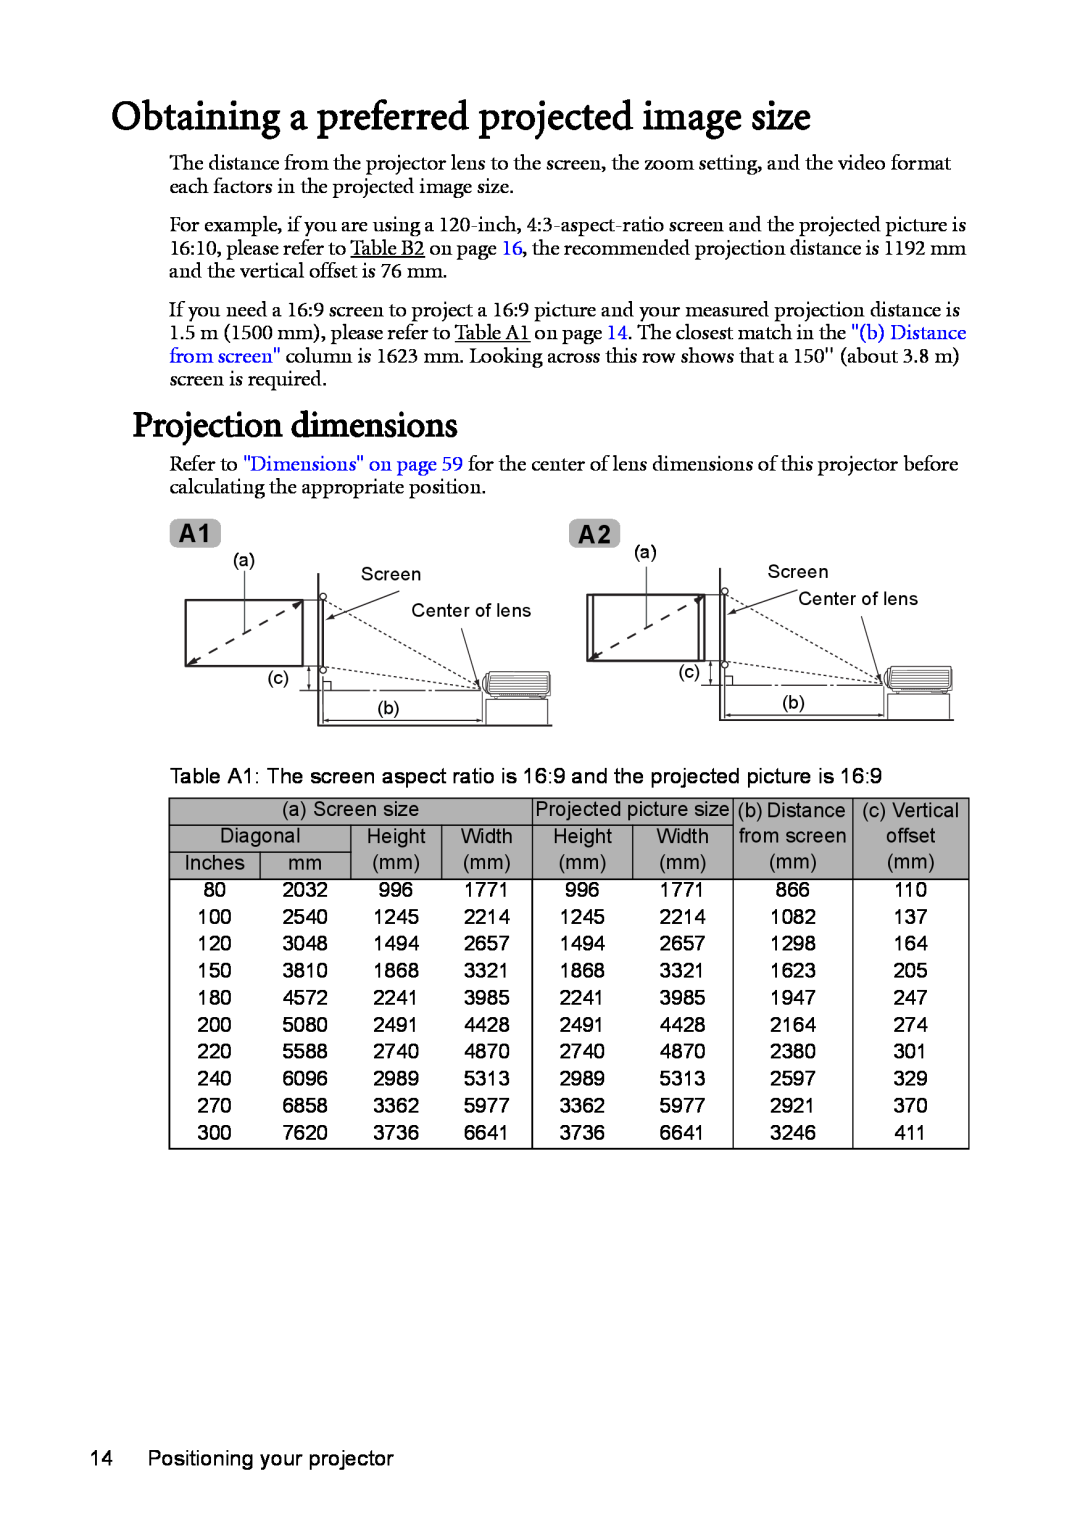 BenQ mw814st user manual Obtaining a preferred projected image size, Projection dimensions 